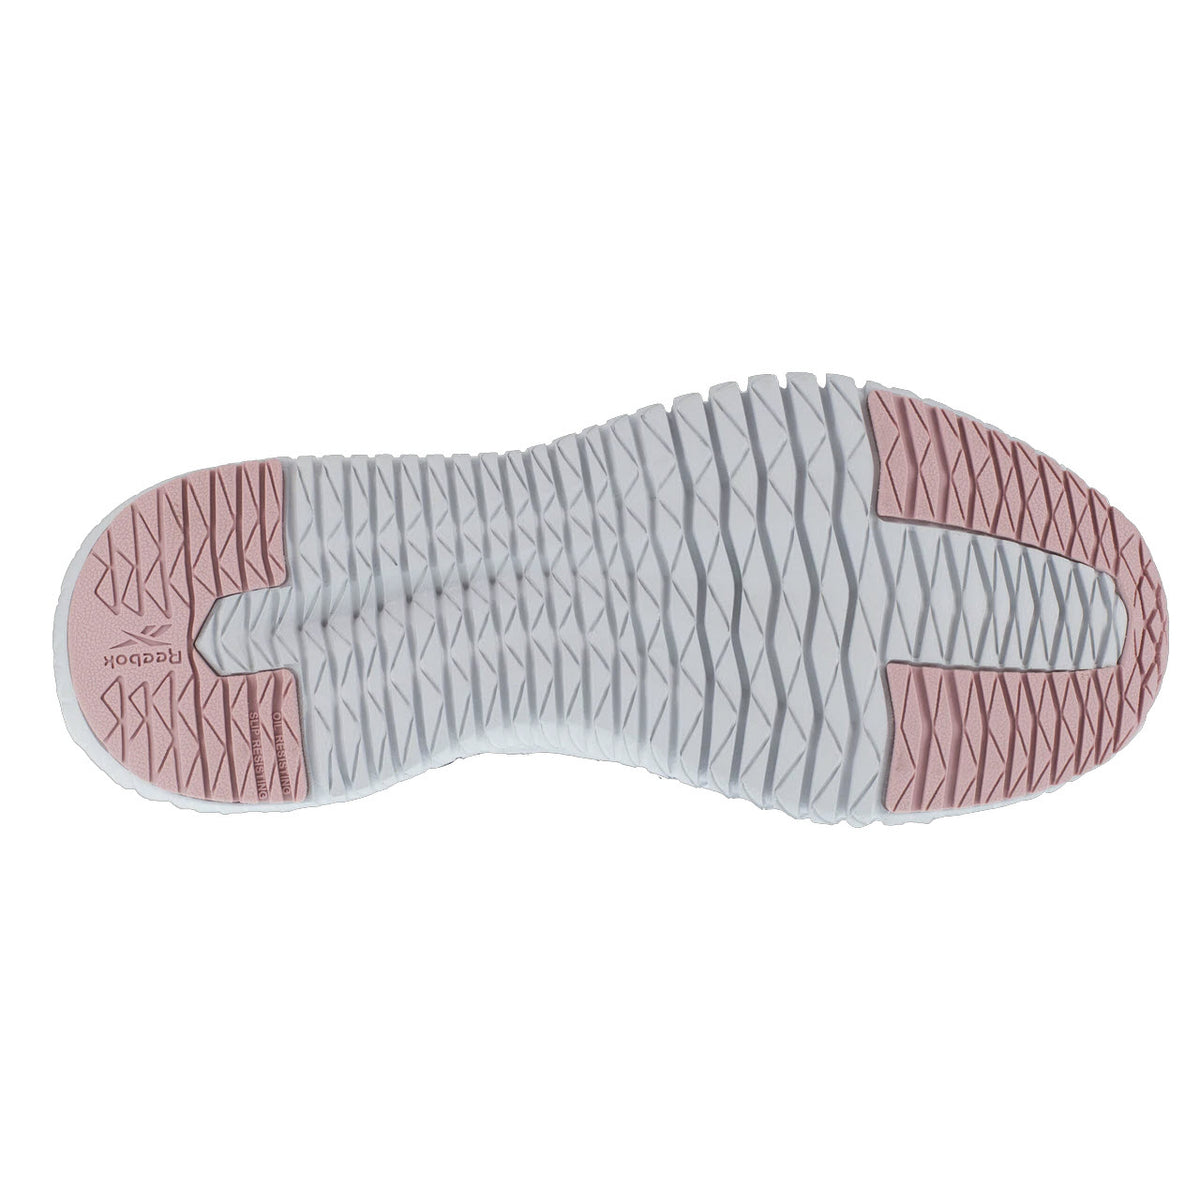 The sole of a Reebok Work CT Flexagon 3 Blue/Pink - Womens shoe with a herringbone pattern and Reebok Work brand name visible.